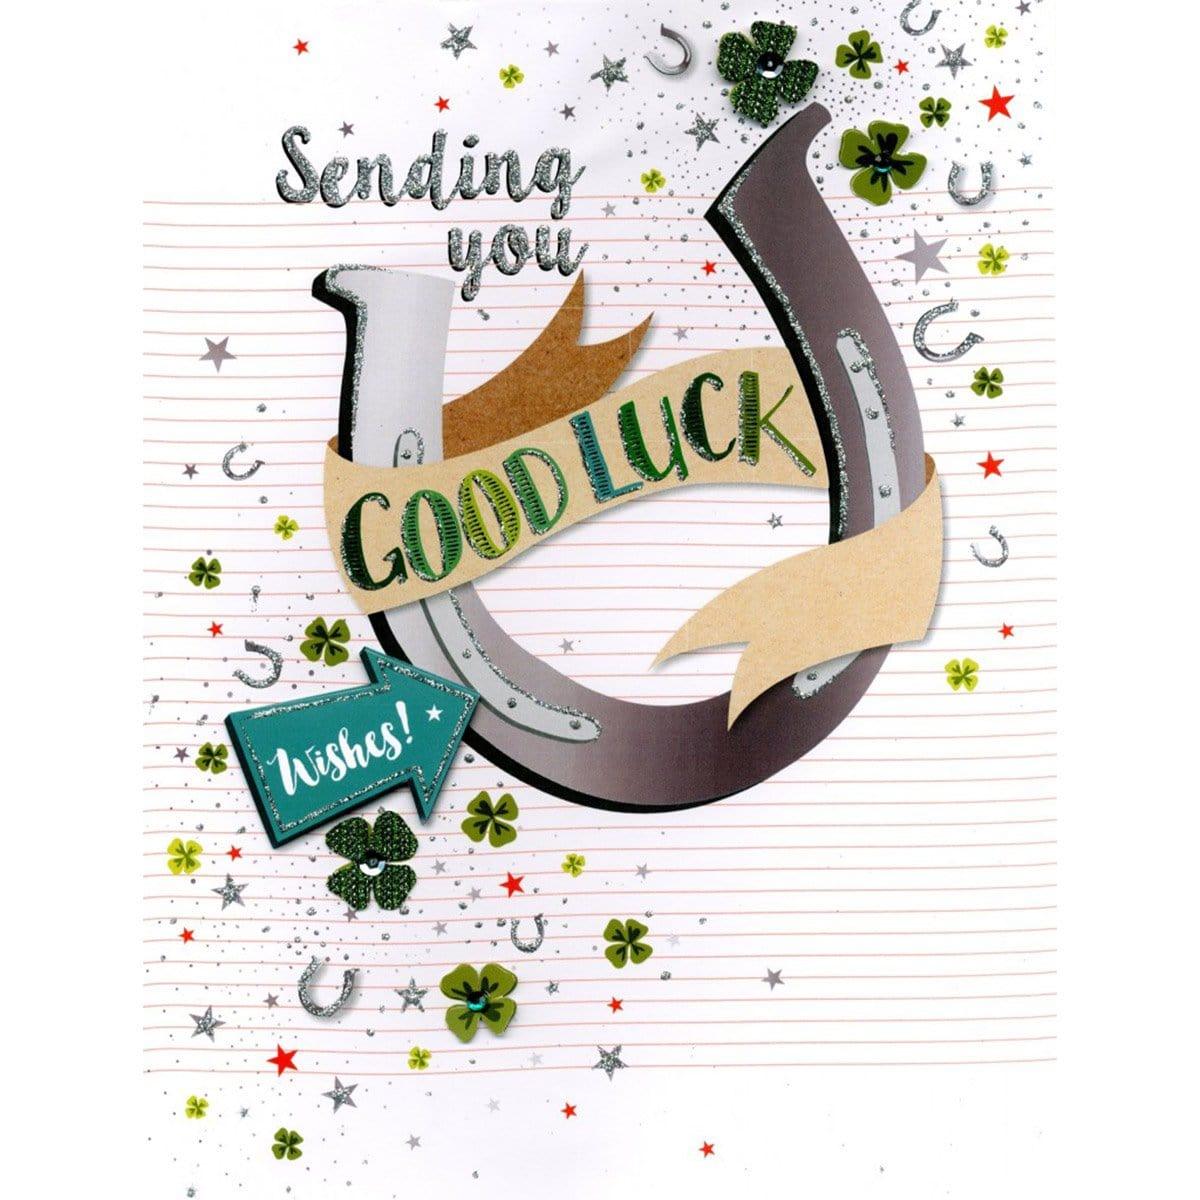 Buy Greeting Cards Gigantic Card - Good Luck sold at Party Expert